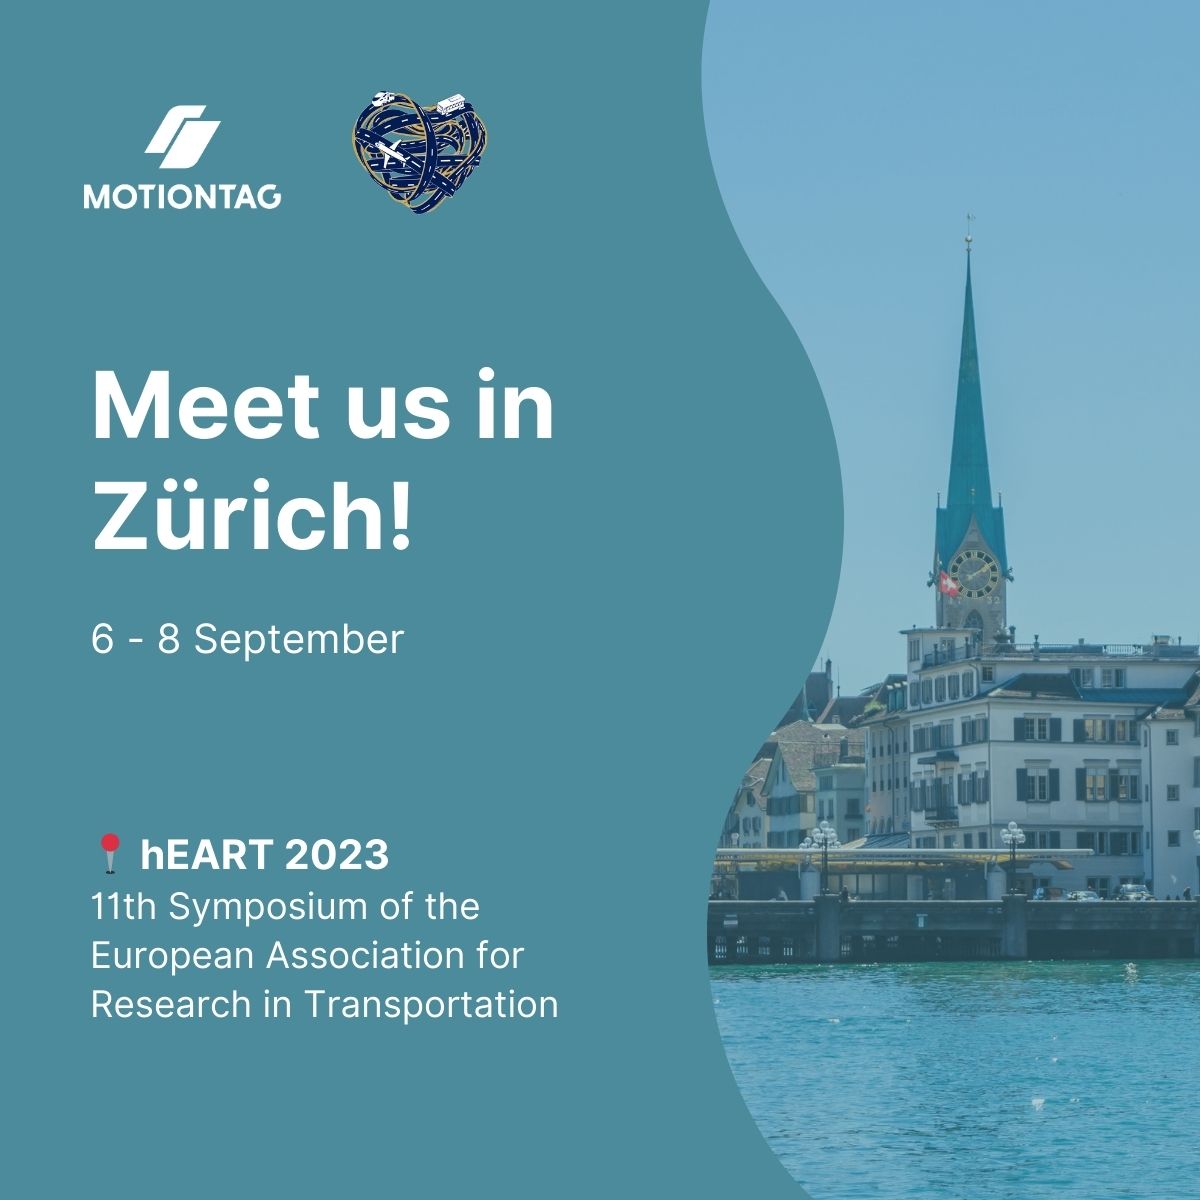 Meet our Key Account Manager, Jennifer Kunz, in #Zurich !🇨🇭

We are also thrilled to visit the hEART Symposium, organized by the @IVT_ETH.

#GreenMobility | #MobilityData | #TransportPlanning | #MobilityResearch